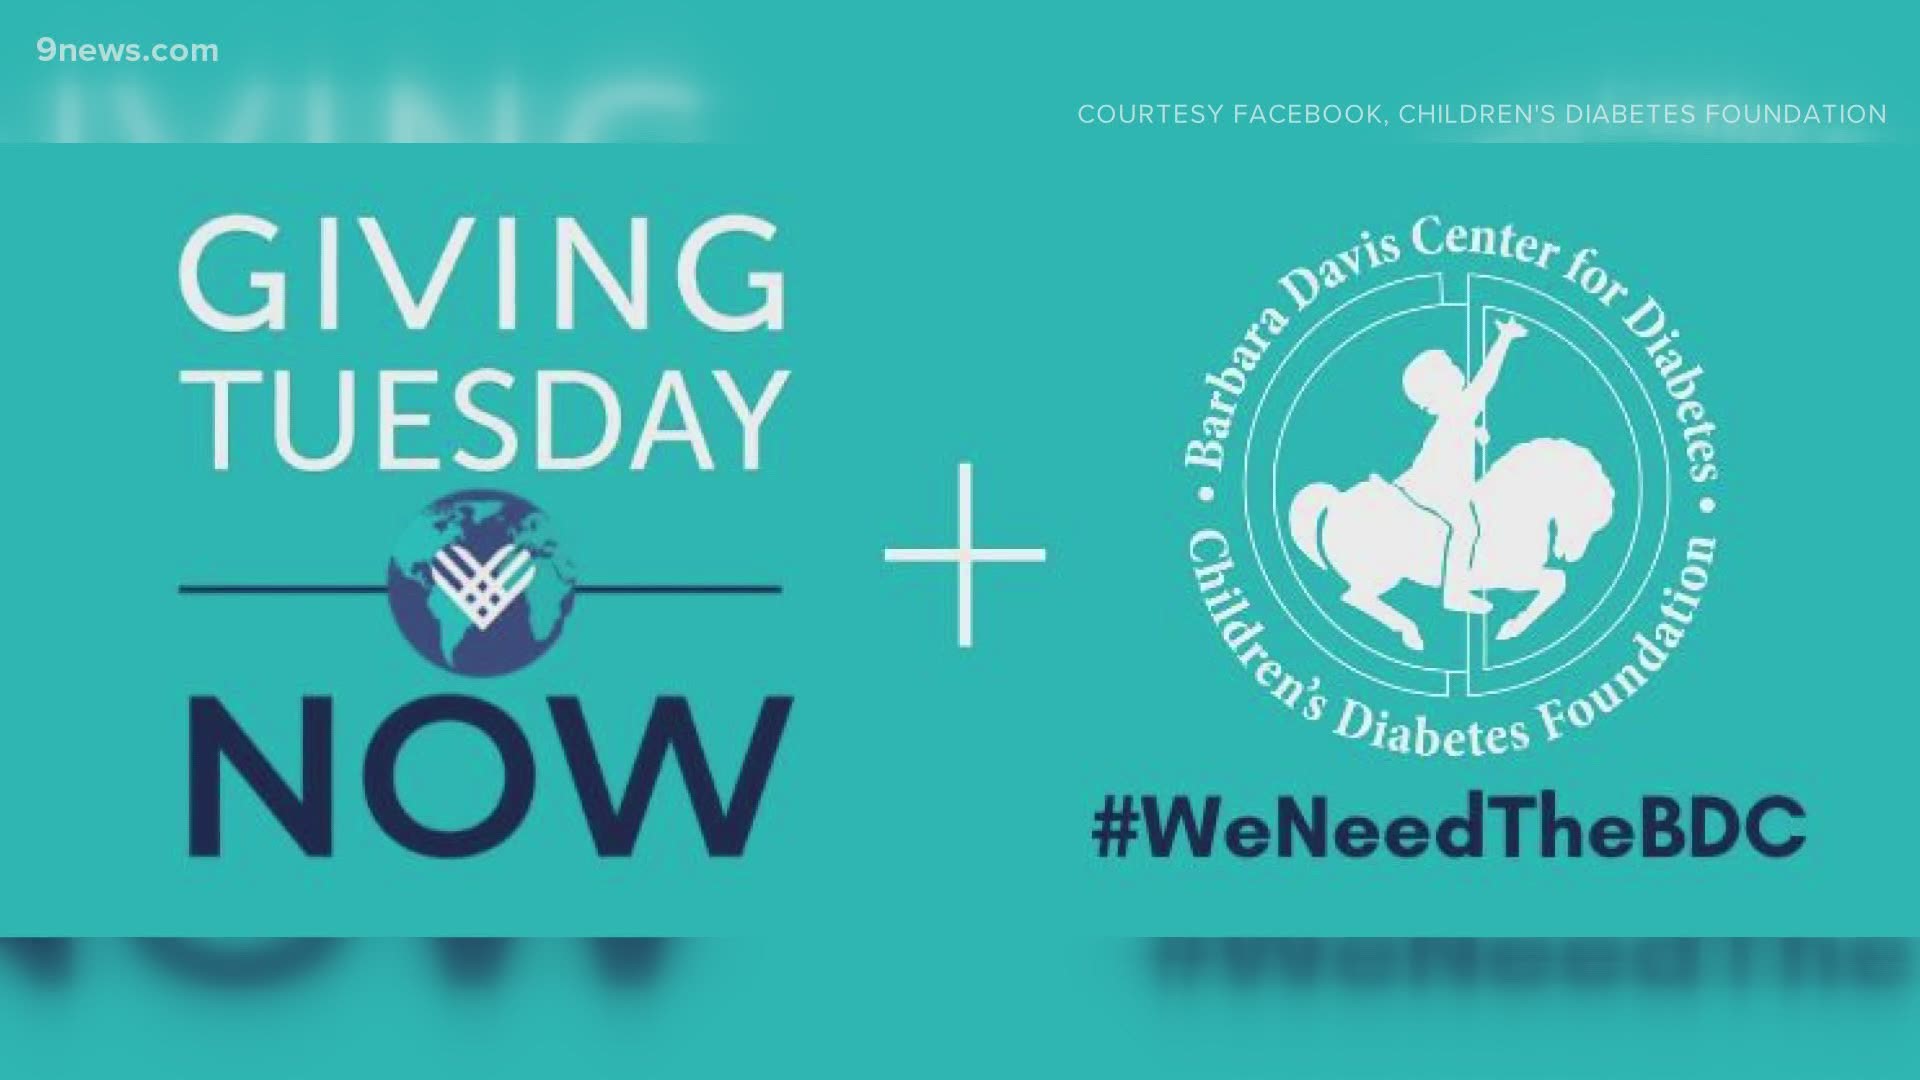 In response to the unprecedented need caused by COVID-19, #GivingTuesdayNow is a proposed day of charitable giving across the world.